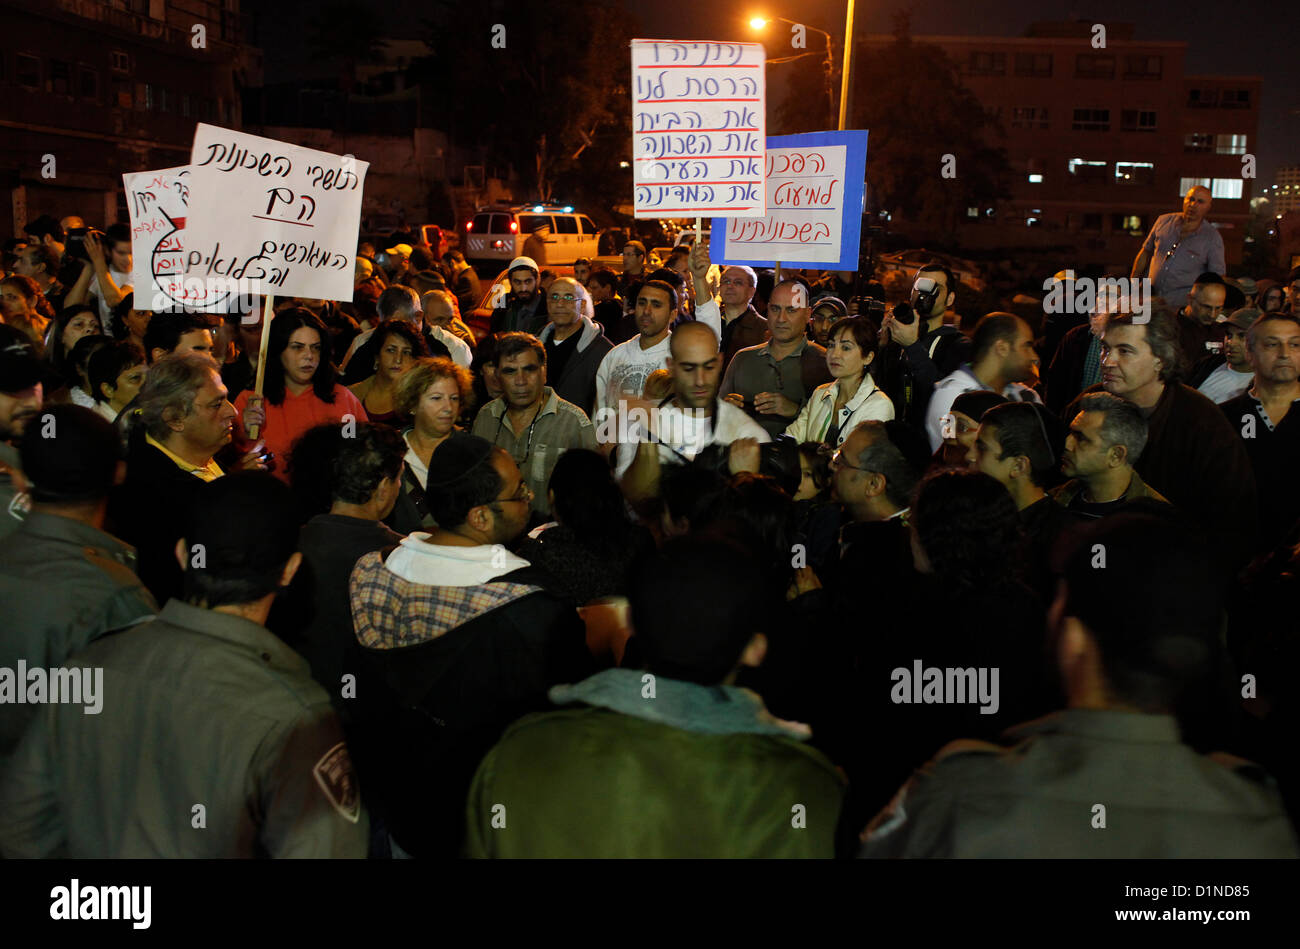 Israeli border policemen block anti migrant protesters in Tel Aviv in response to publication of an incident in which an Eritrean national was arrested on suspicion of raping an 83-year-old woman in Southern Tel Aviv on 31 December 2012. Stock Photo